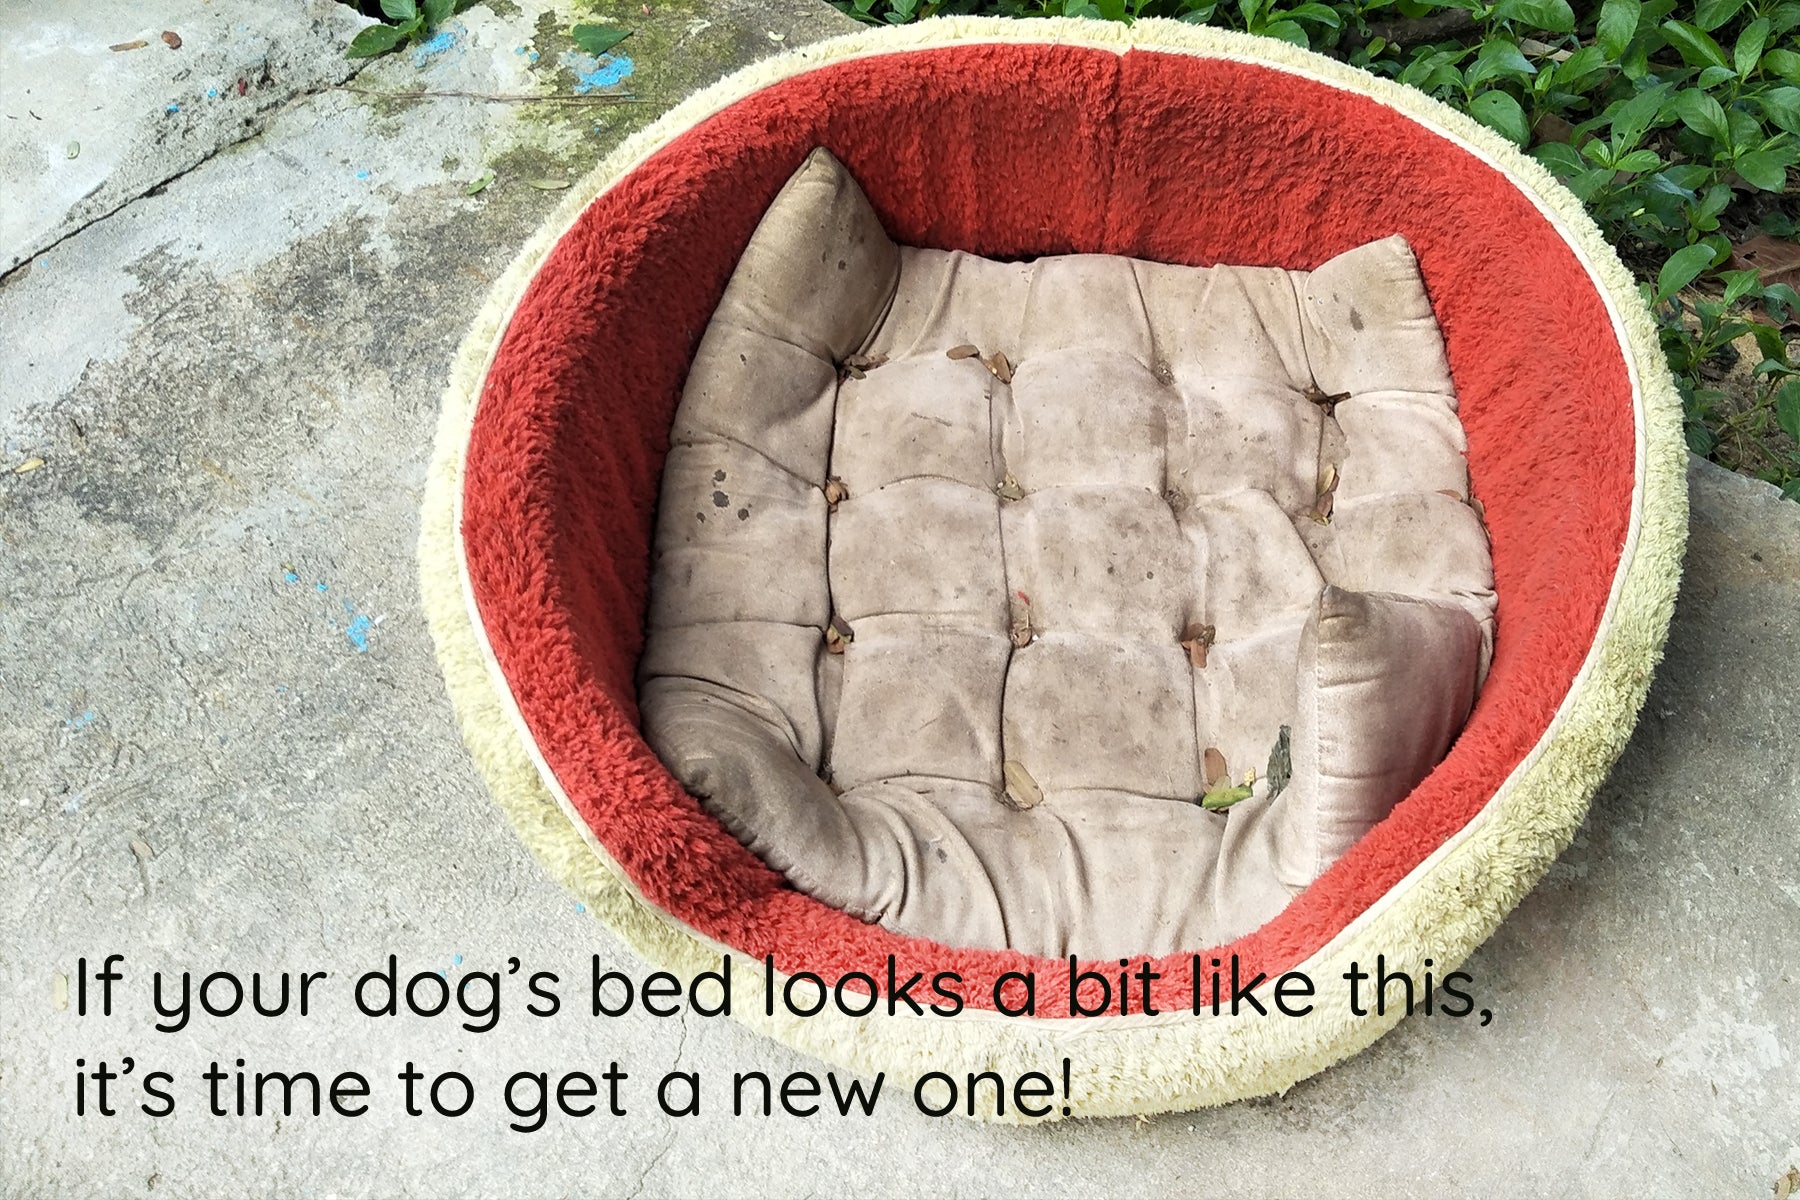 distressed dog bed that needs to be replaced